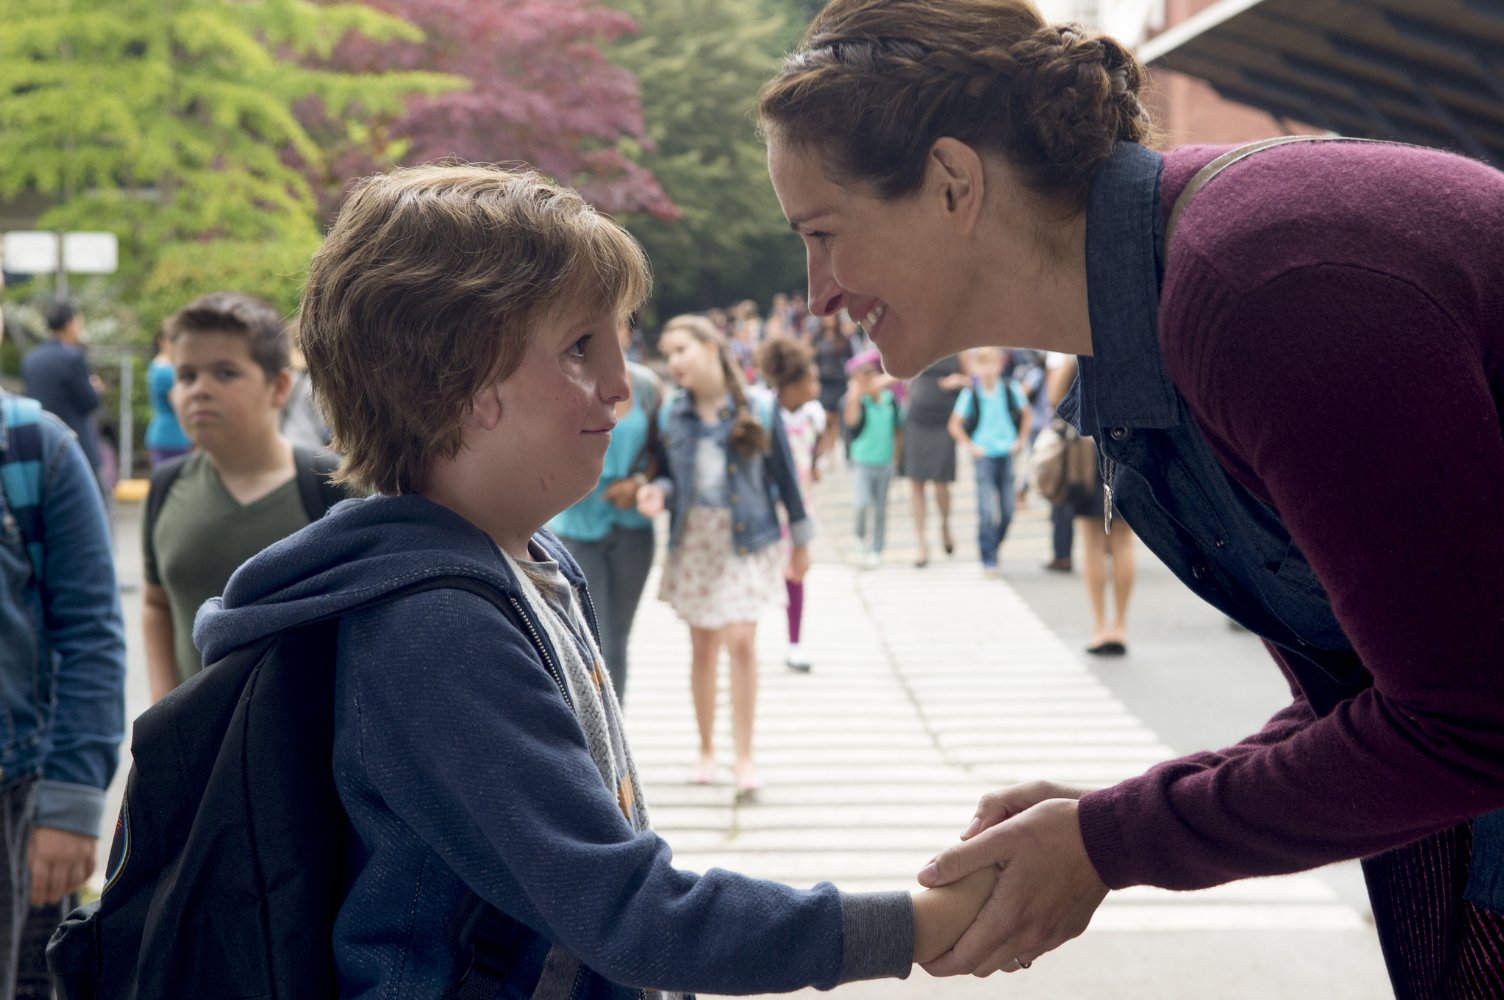 Wonder Delivers Captivating Characters in Heartwarming Story - The